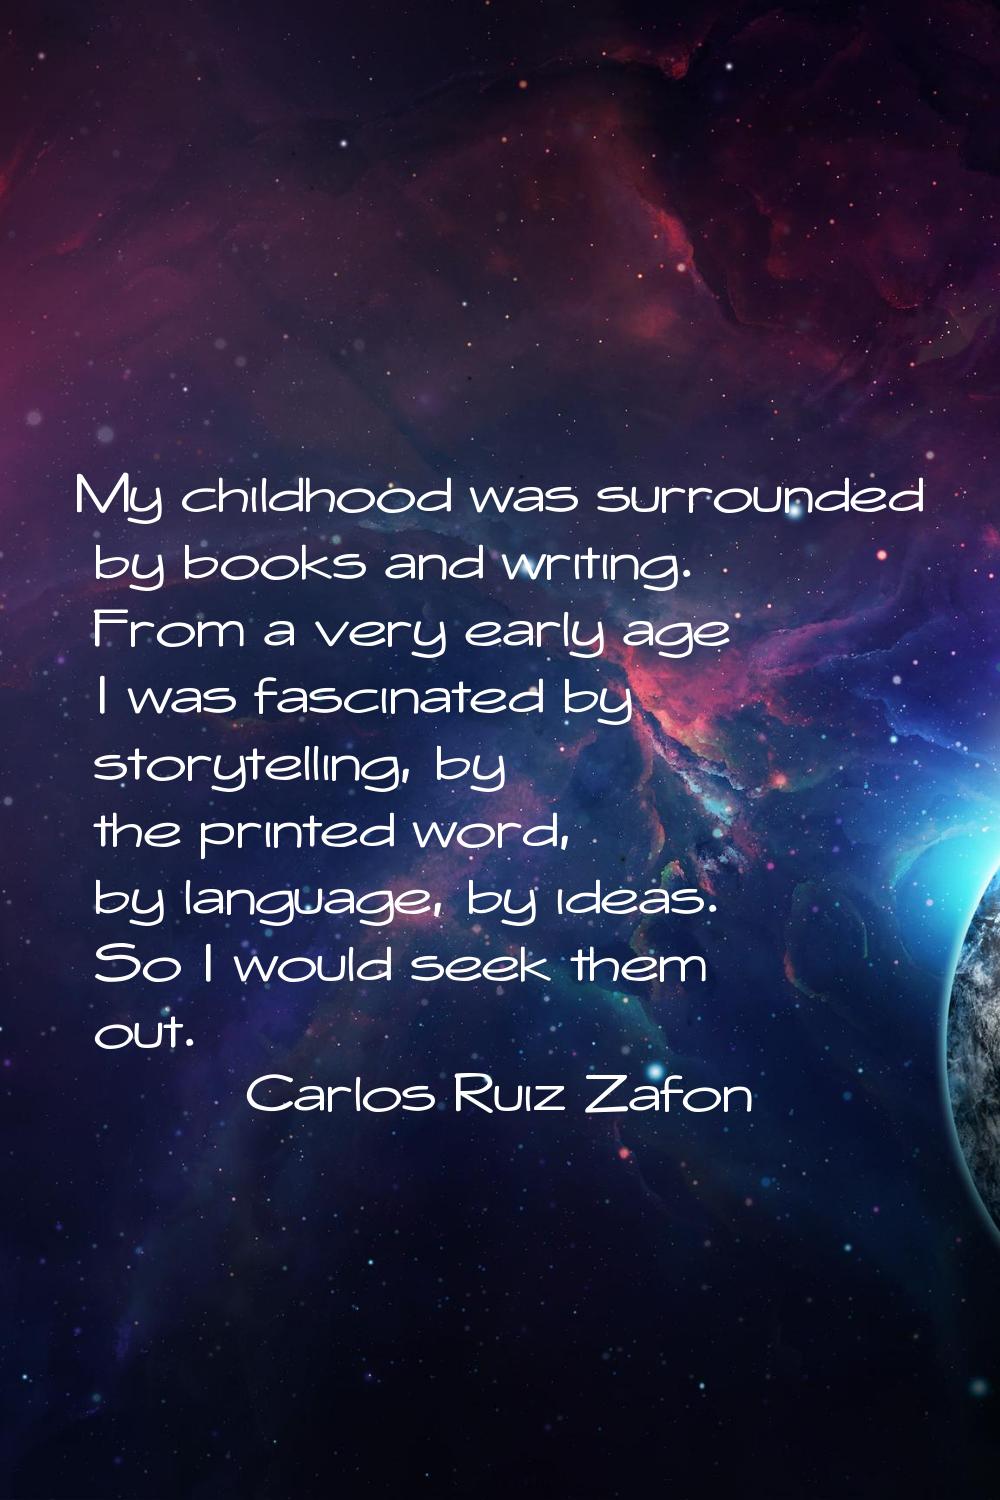 My childhood was surrounded by books and writing. From a very early age I was fascinated by storyte